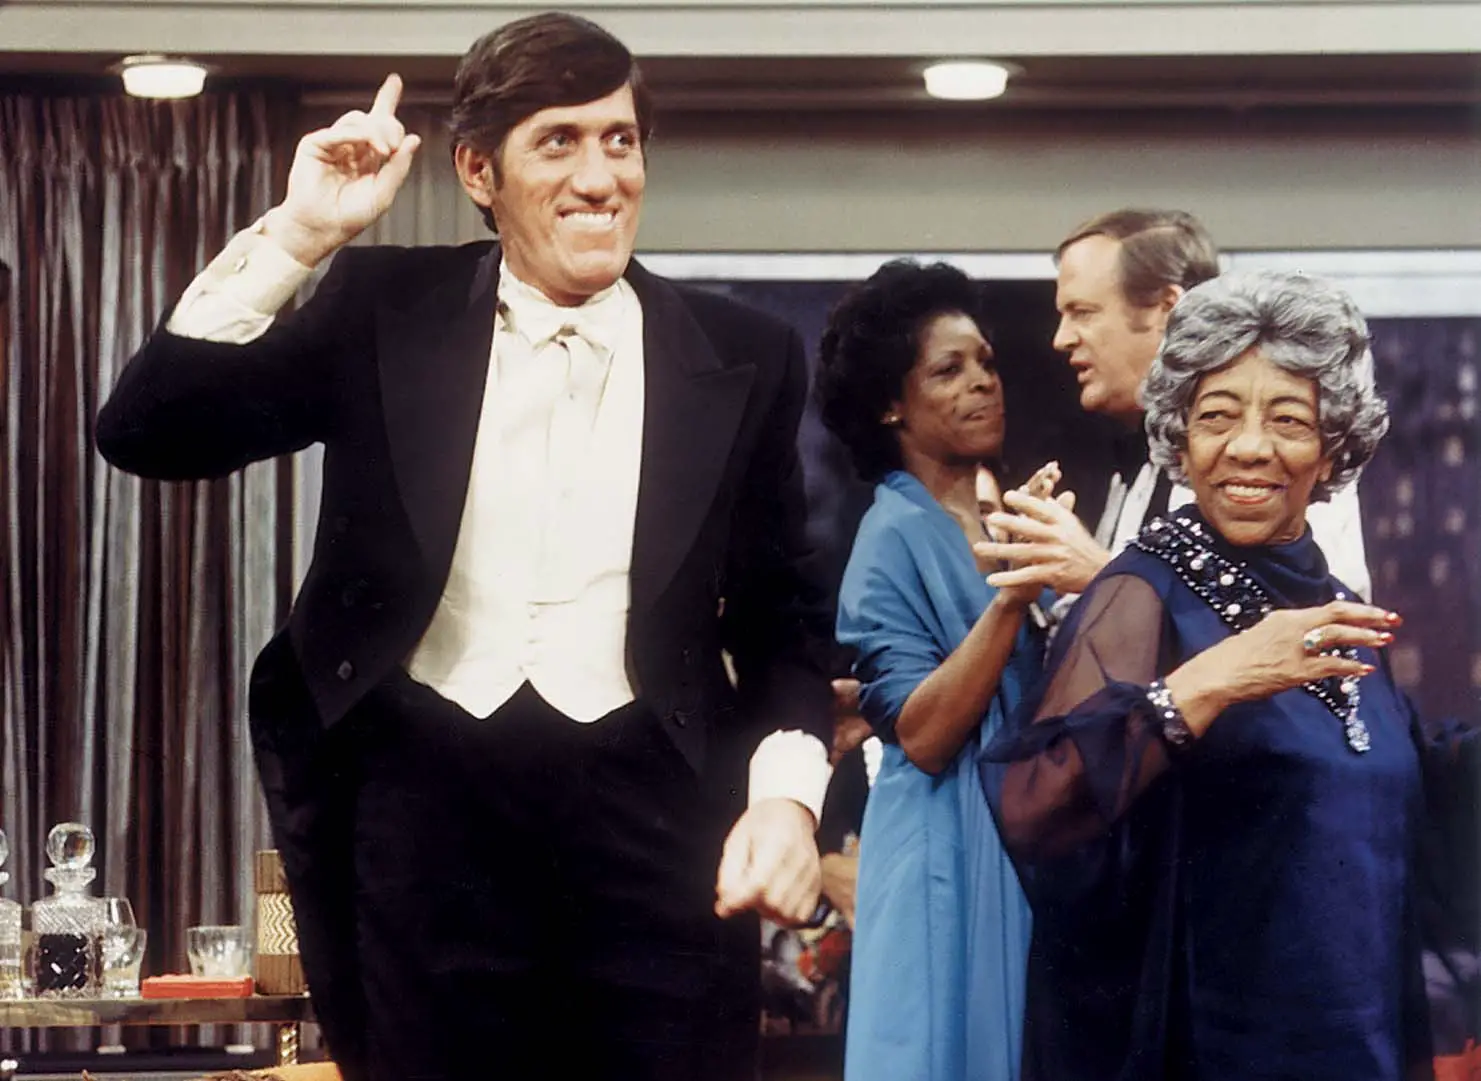 Paul Benedict, of "The Jeffersons" fame, became typecast as an Englishman, even though he was born in New Mexico.